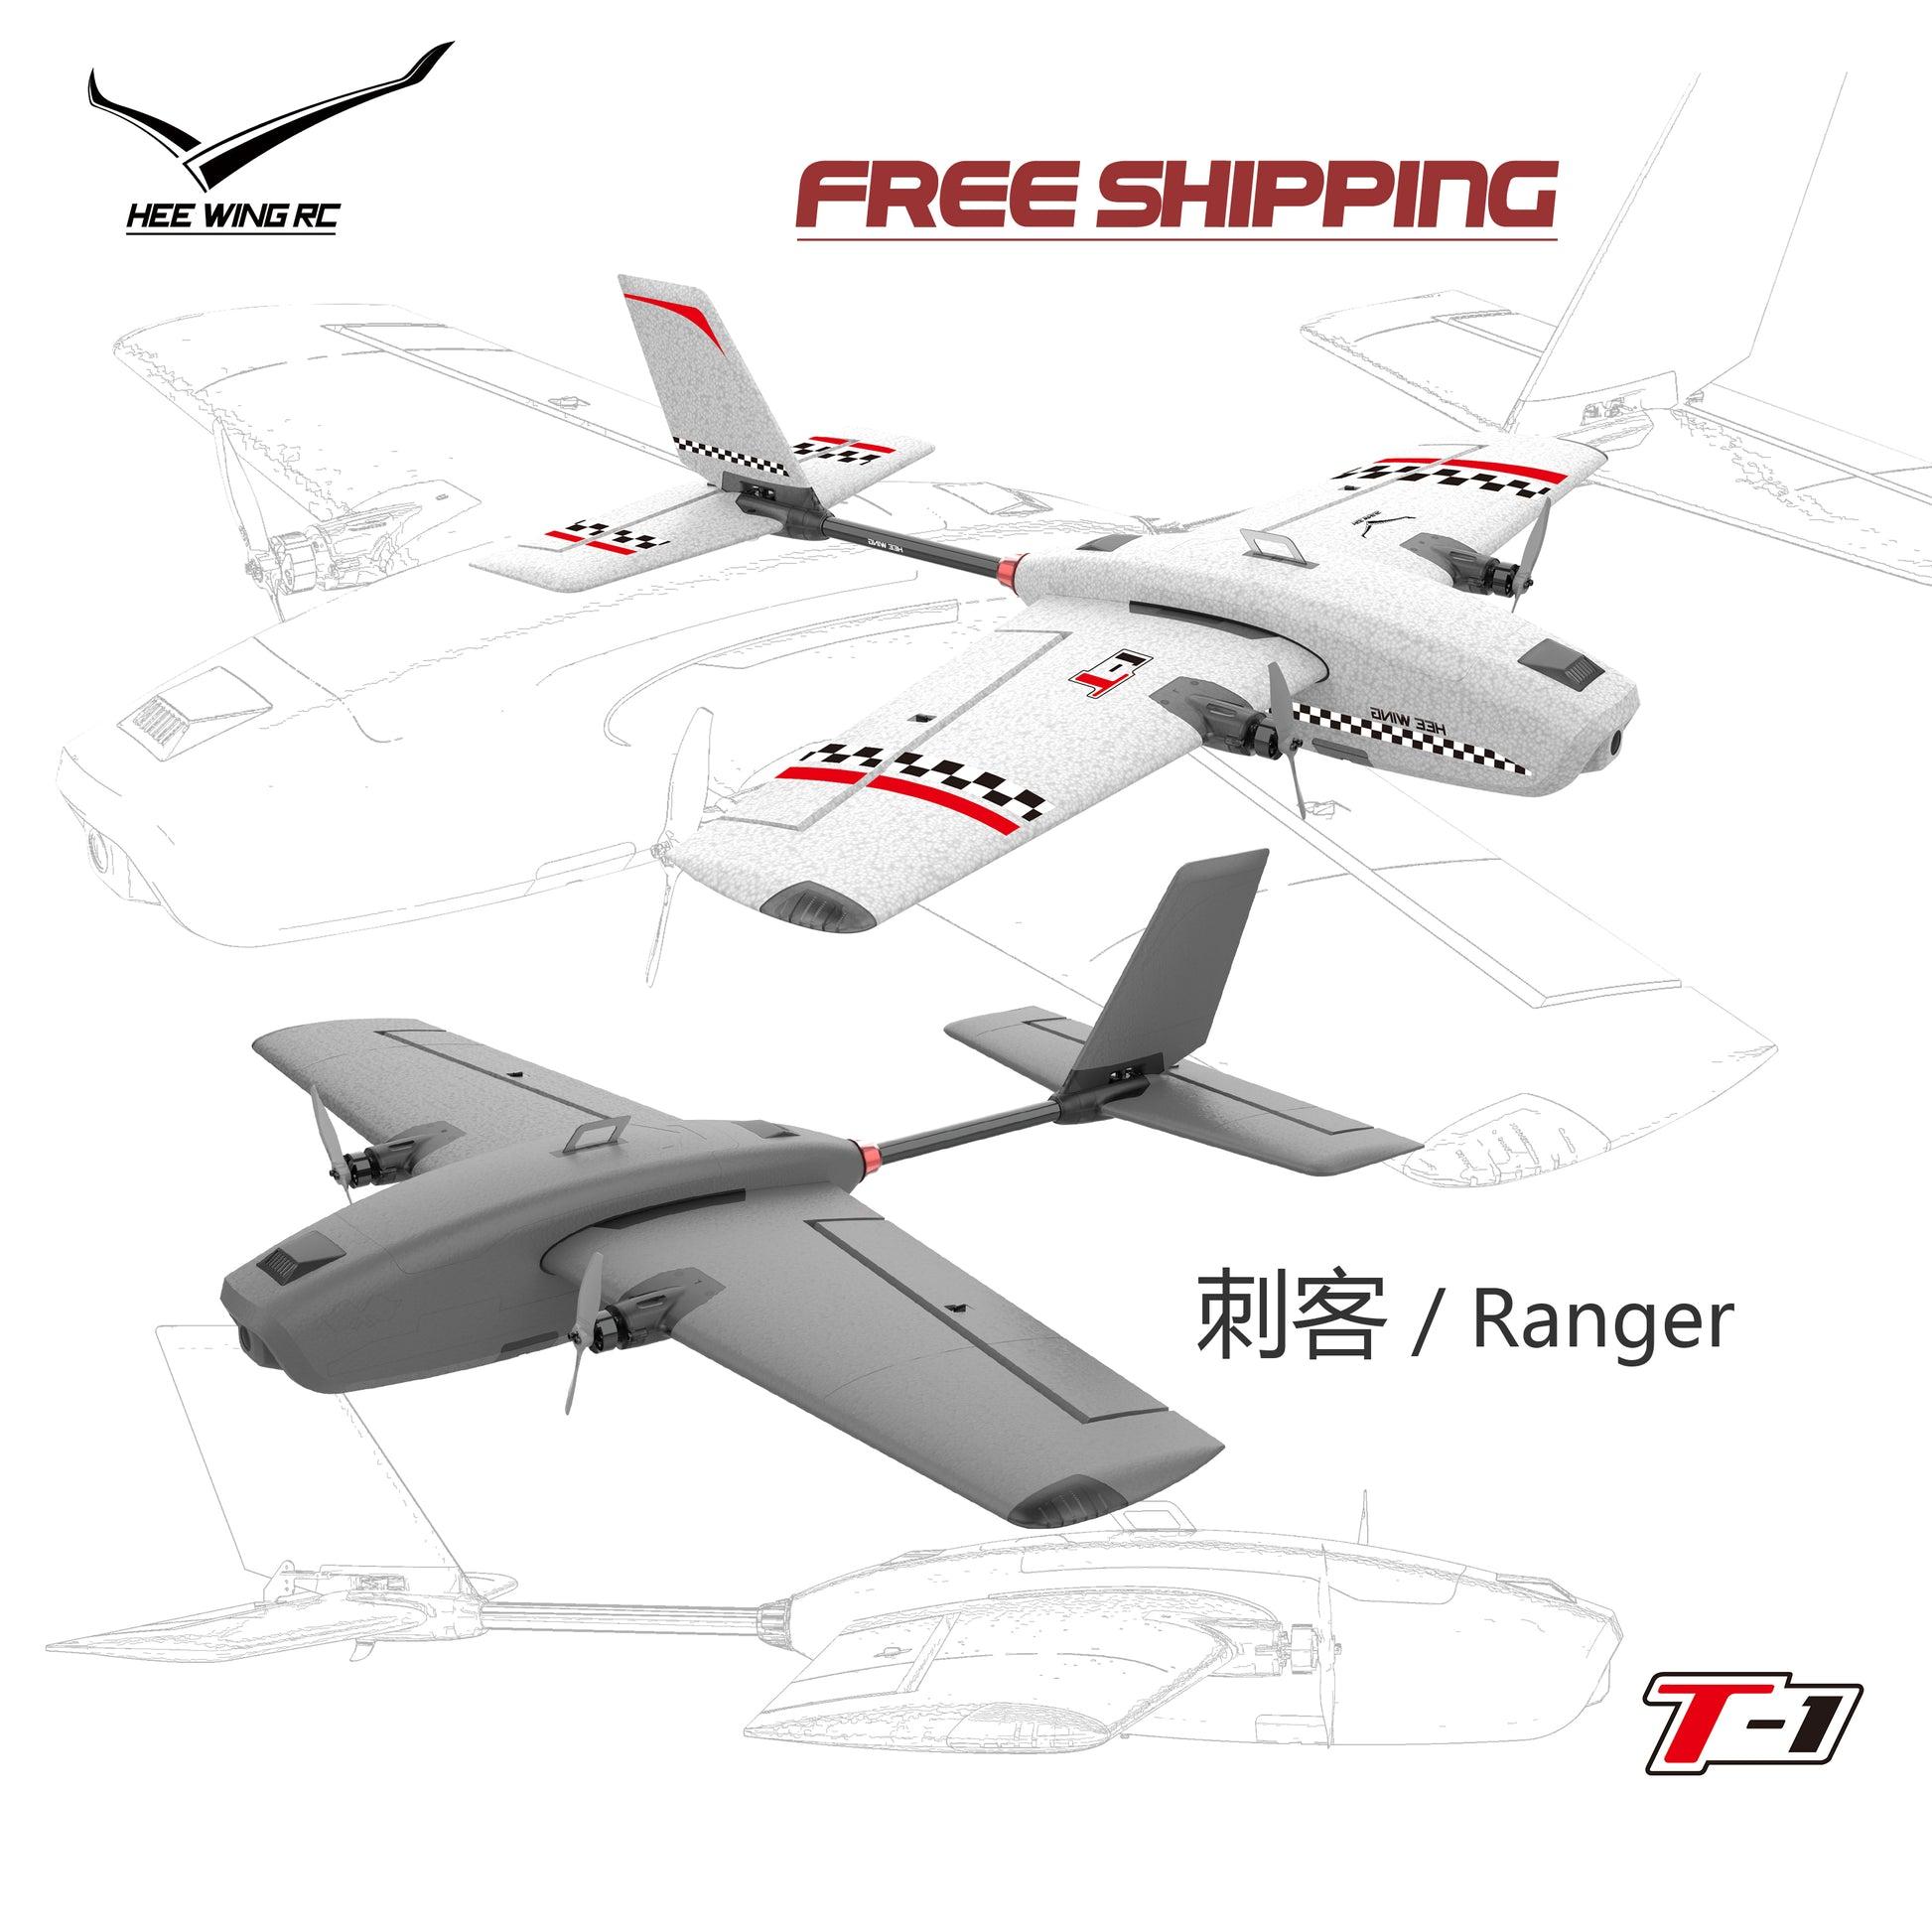 Heewing T1 Ranger: Pros and Cons: The User Experience of the heewing t1 ranger